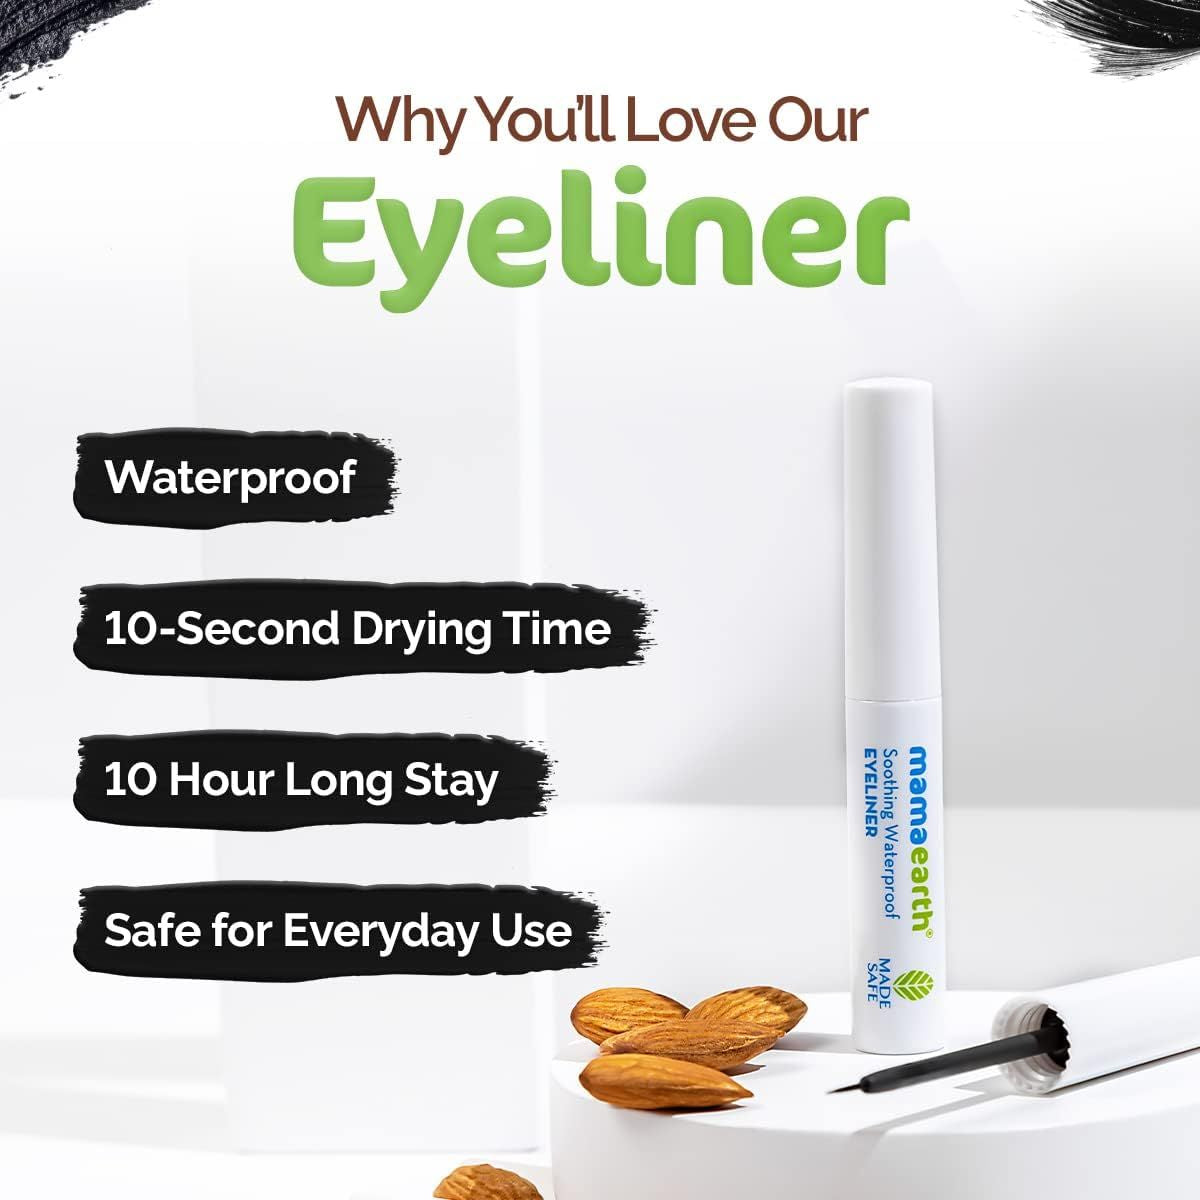 Soothing Waterproof Eyeliner with Almond Oil & Castor Oil for 10 Hour Long Stay - 3.5 ml